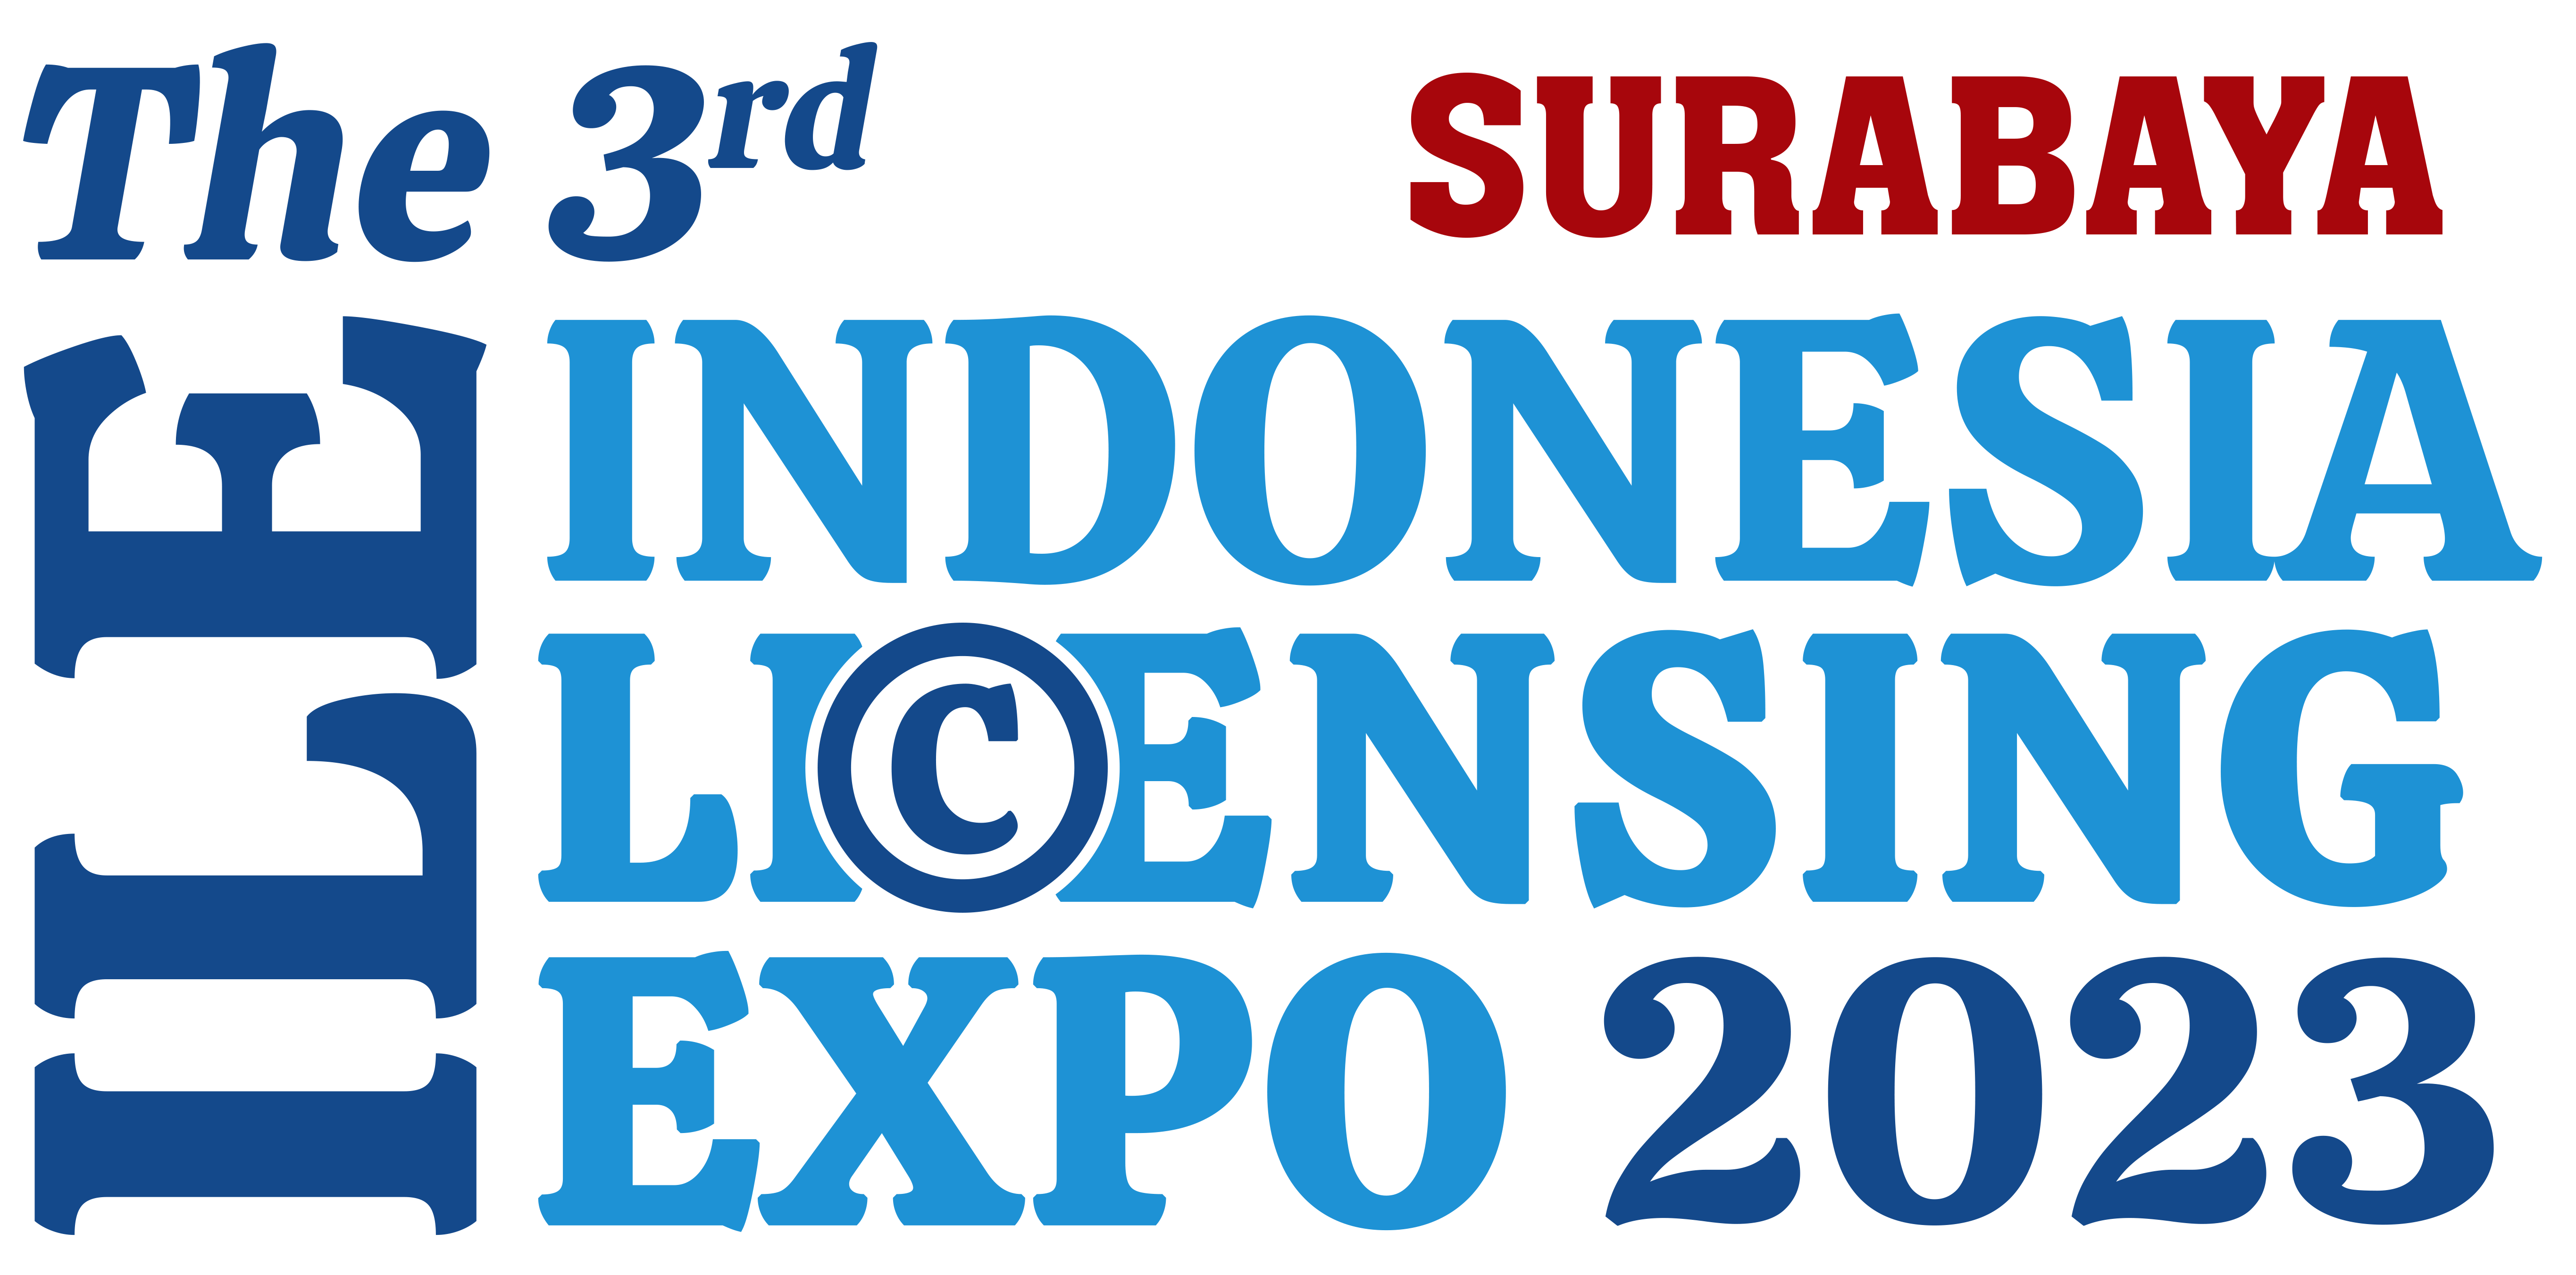 Indo Leather & Footwear Expo